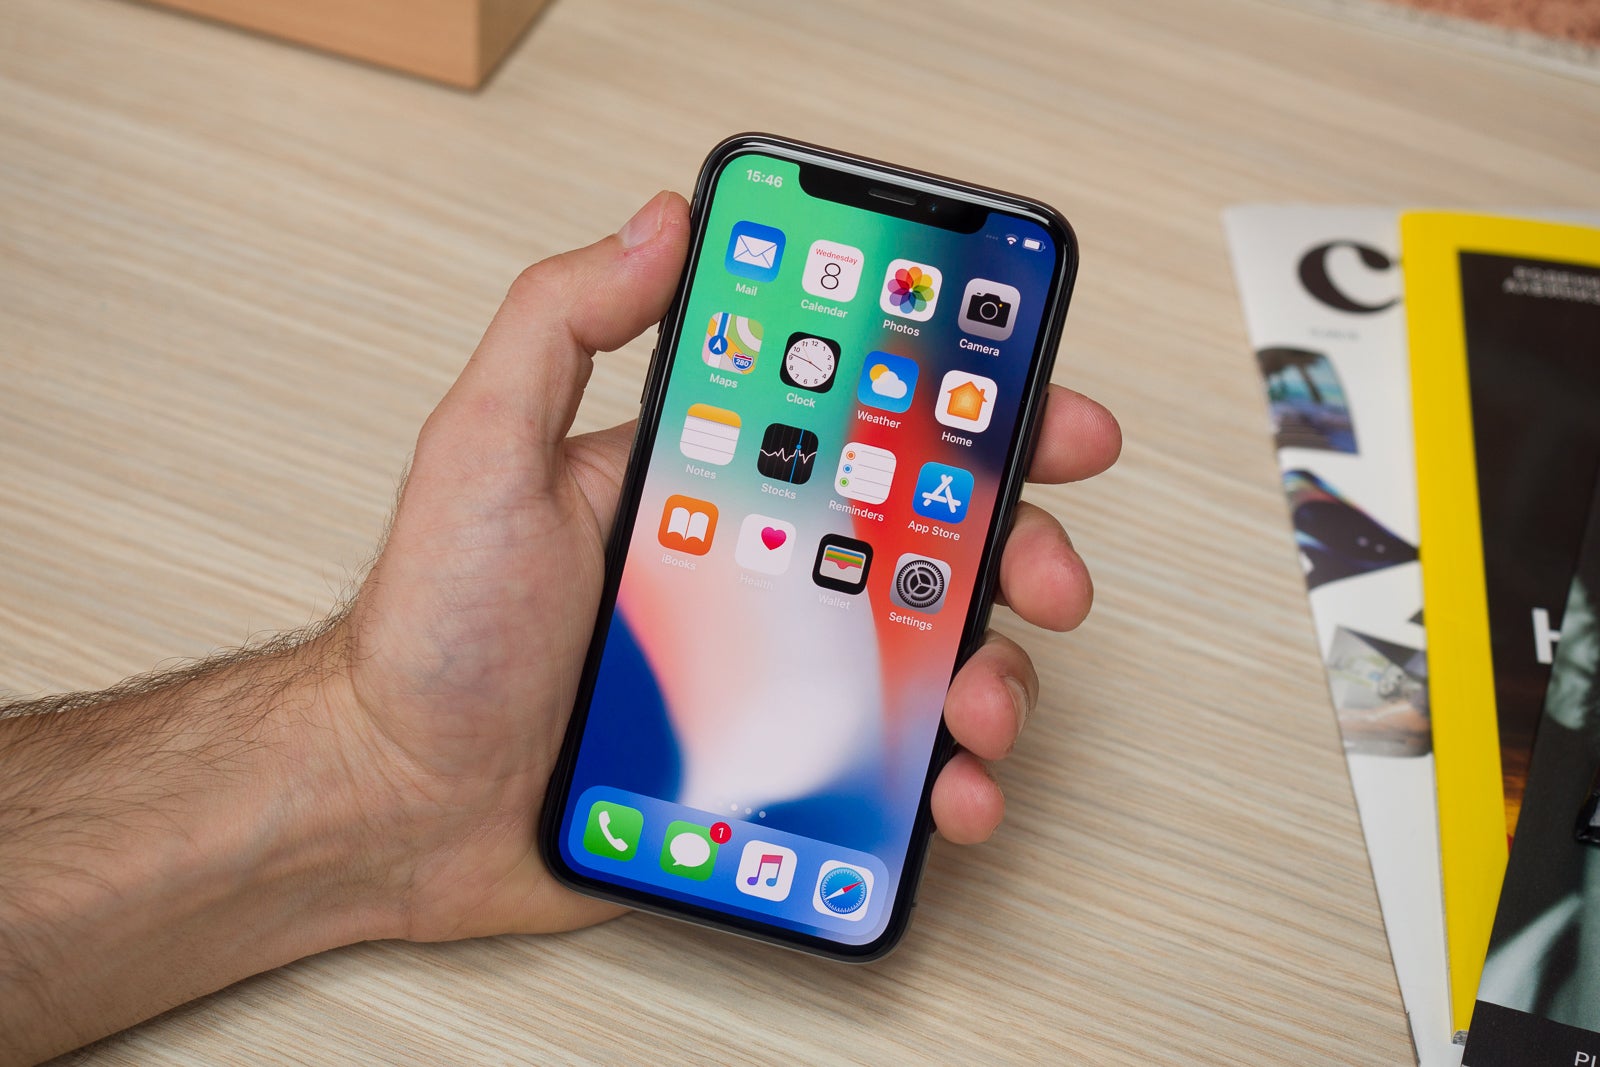 The iPhone X; Apple&#039;s first OLED smartphone - Future iPhones could carry next-gen display tech developed by Foxconn